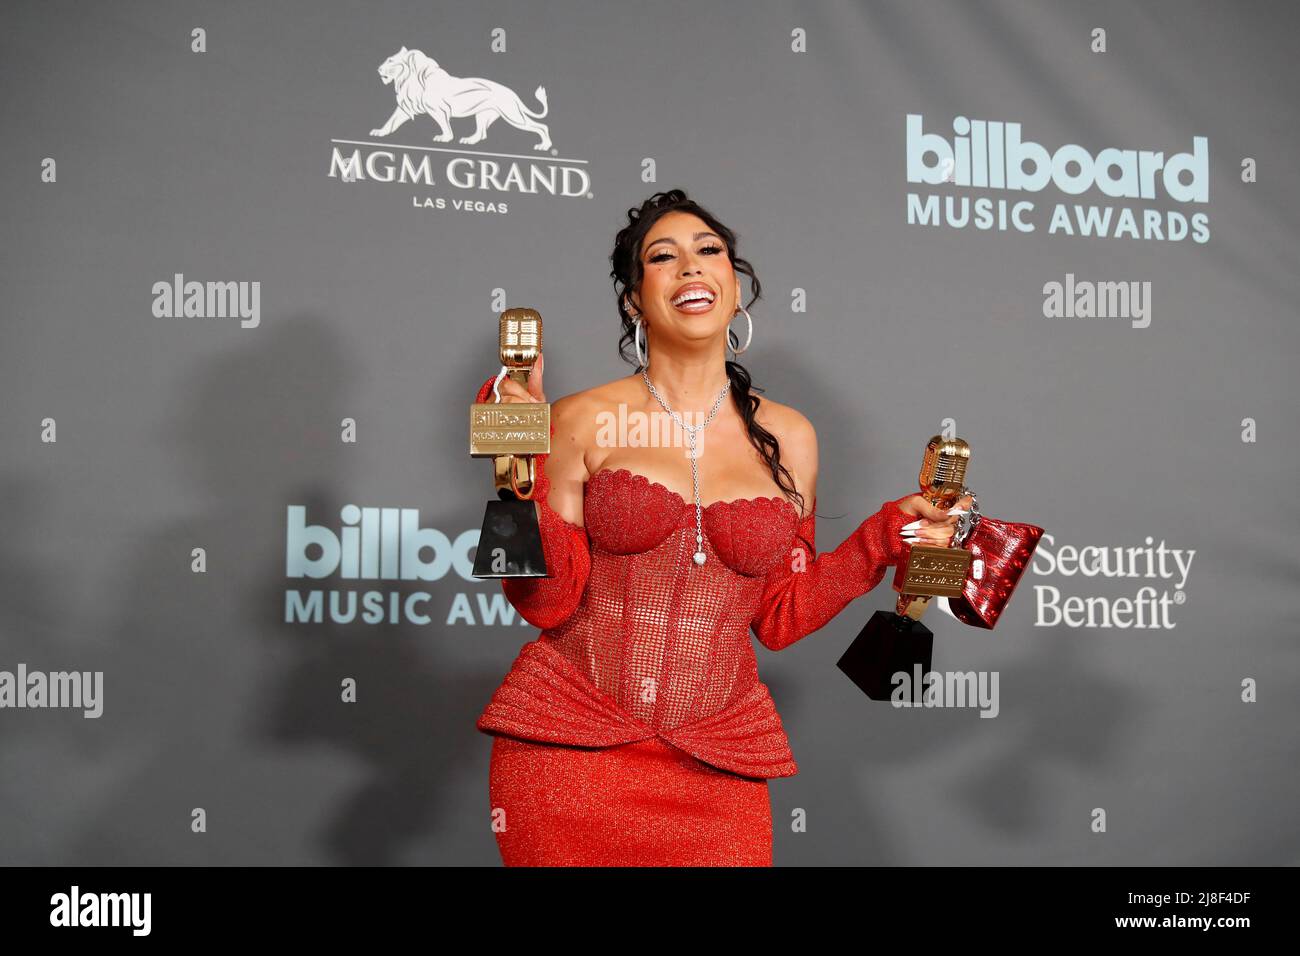 Kali Uchis poses with awards for Top Latin Female Artist and Top Latin Song in the photo room during the Billboard Music Awards in Las Vegas, Nevada U.S. May 15, 2022. REUTERS/Steve Marcus Stock Photo